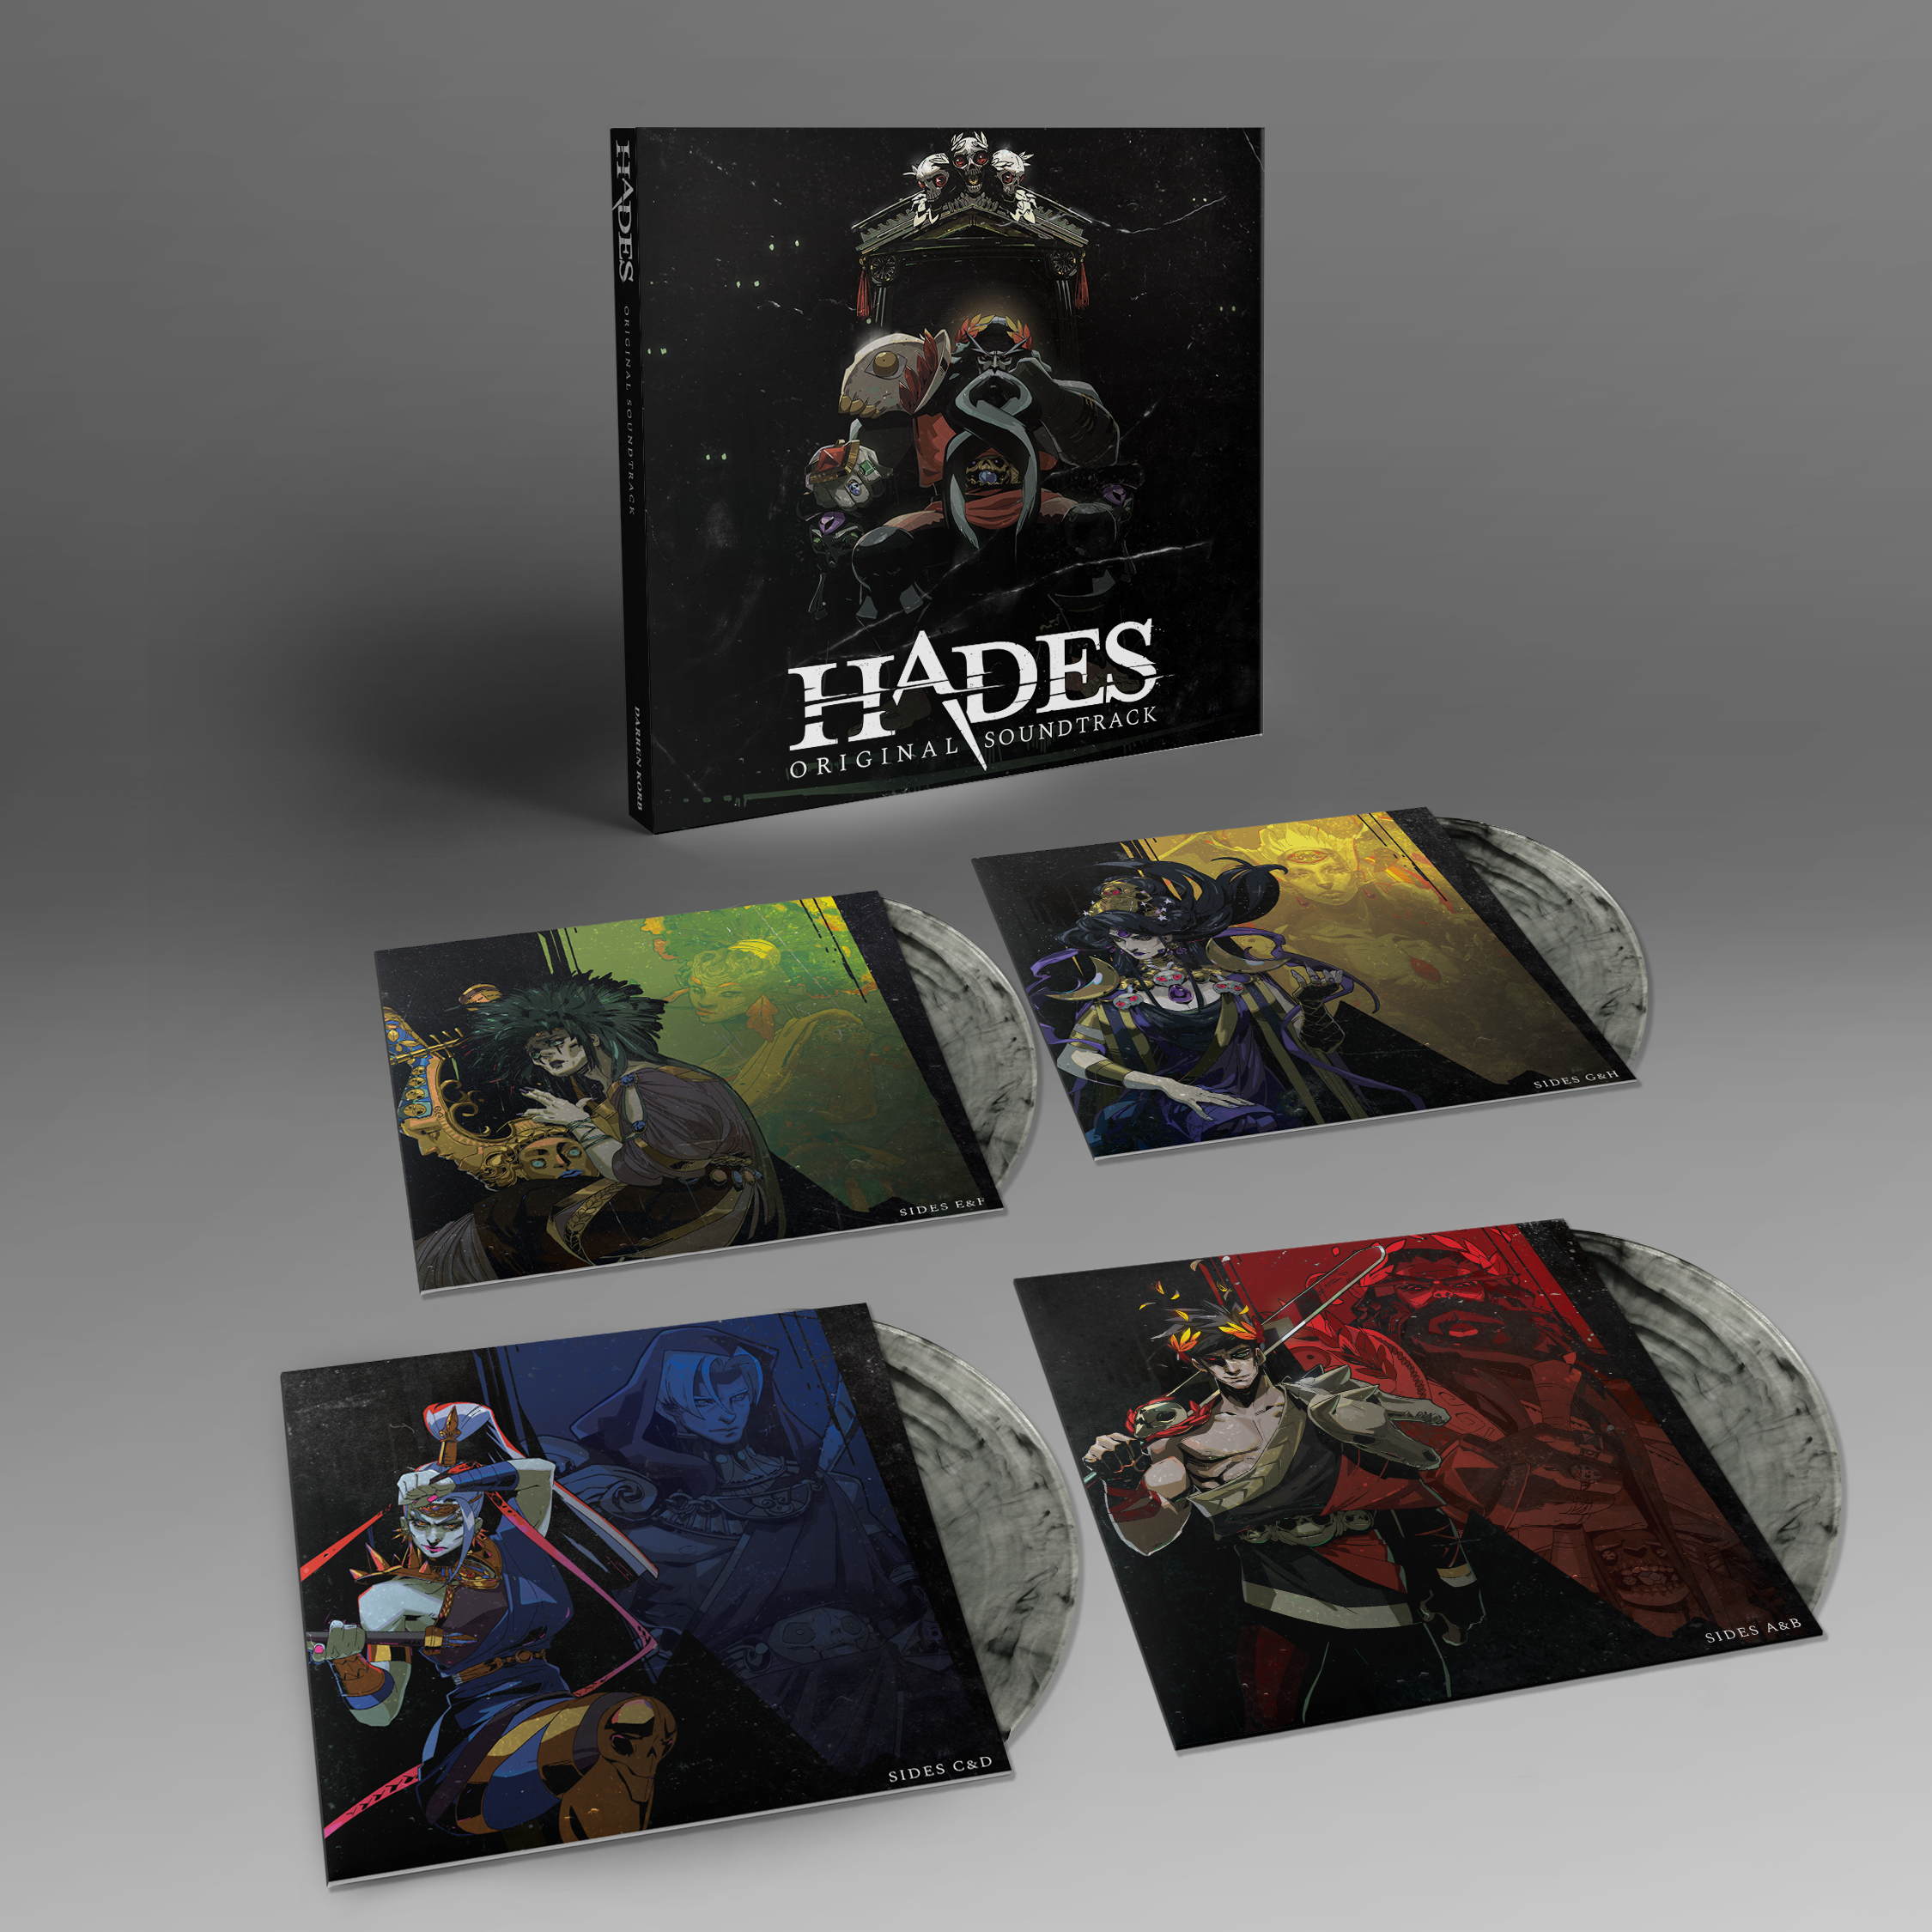 hades release date switch